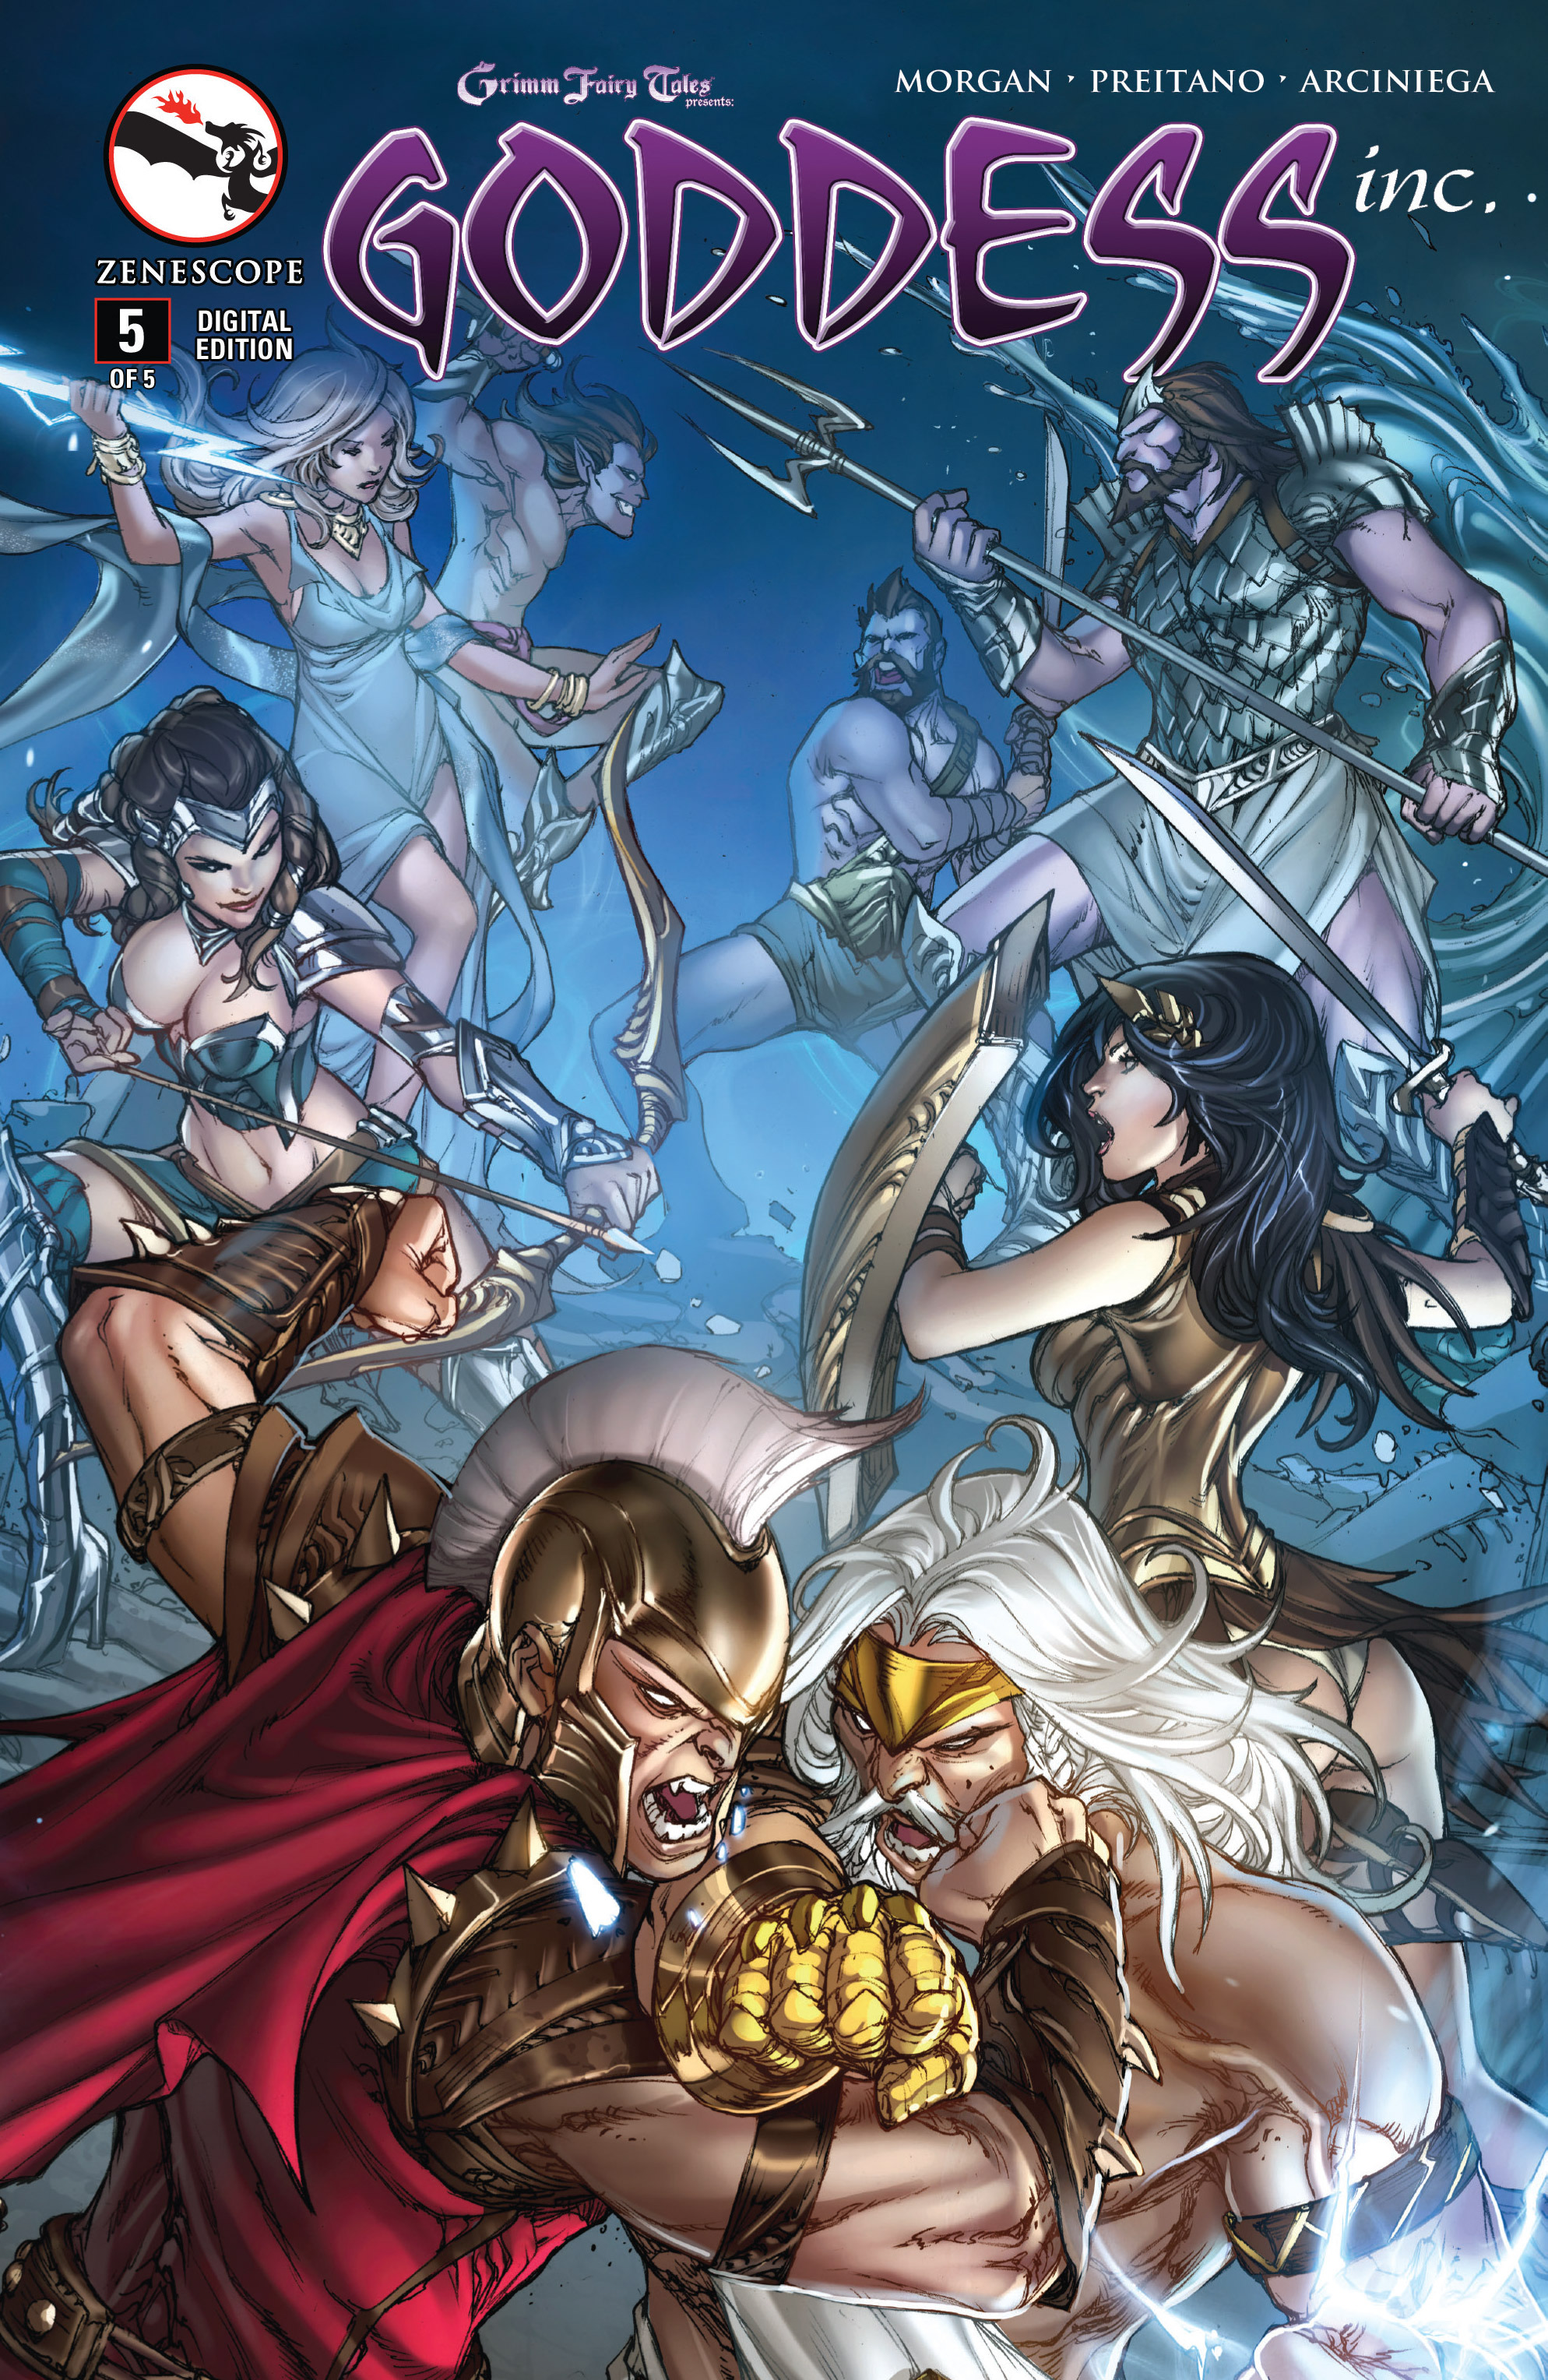 Read online Grimm Fairy Tales presents Goddess Inc. comic -  Issue #5 - 1